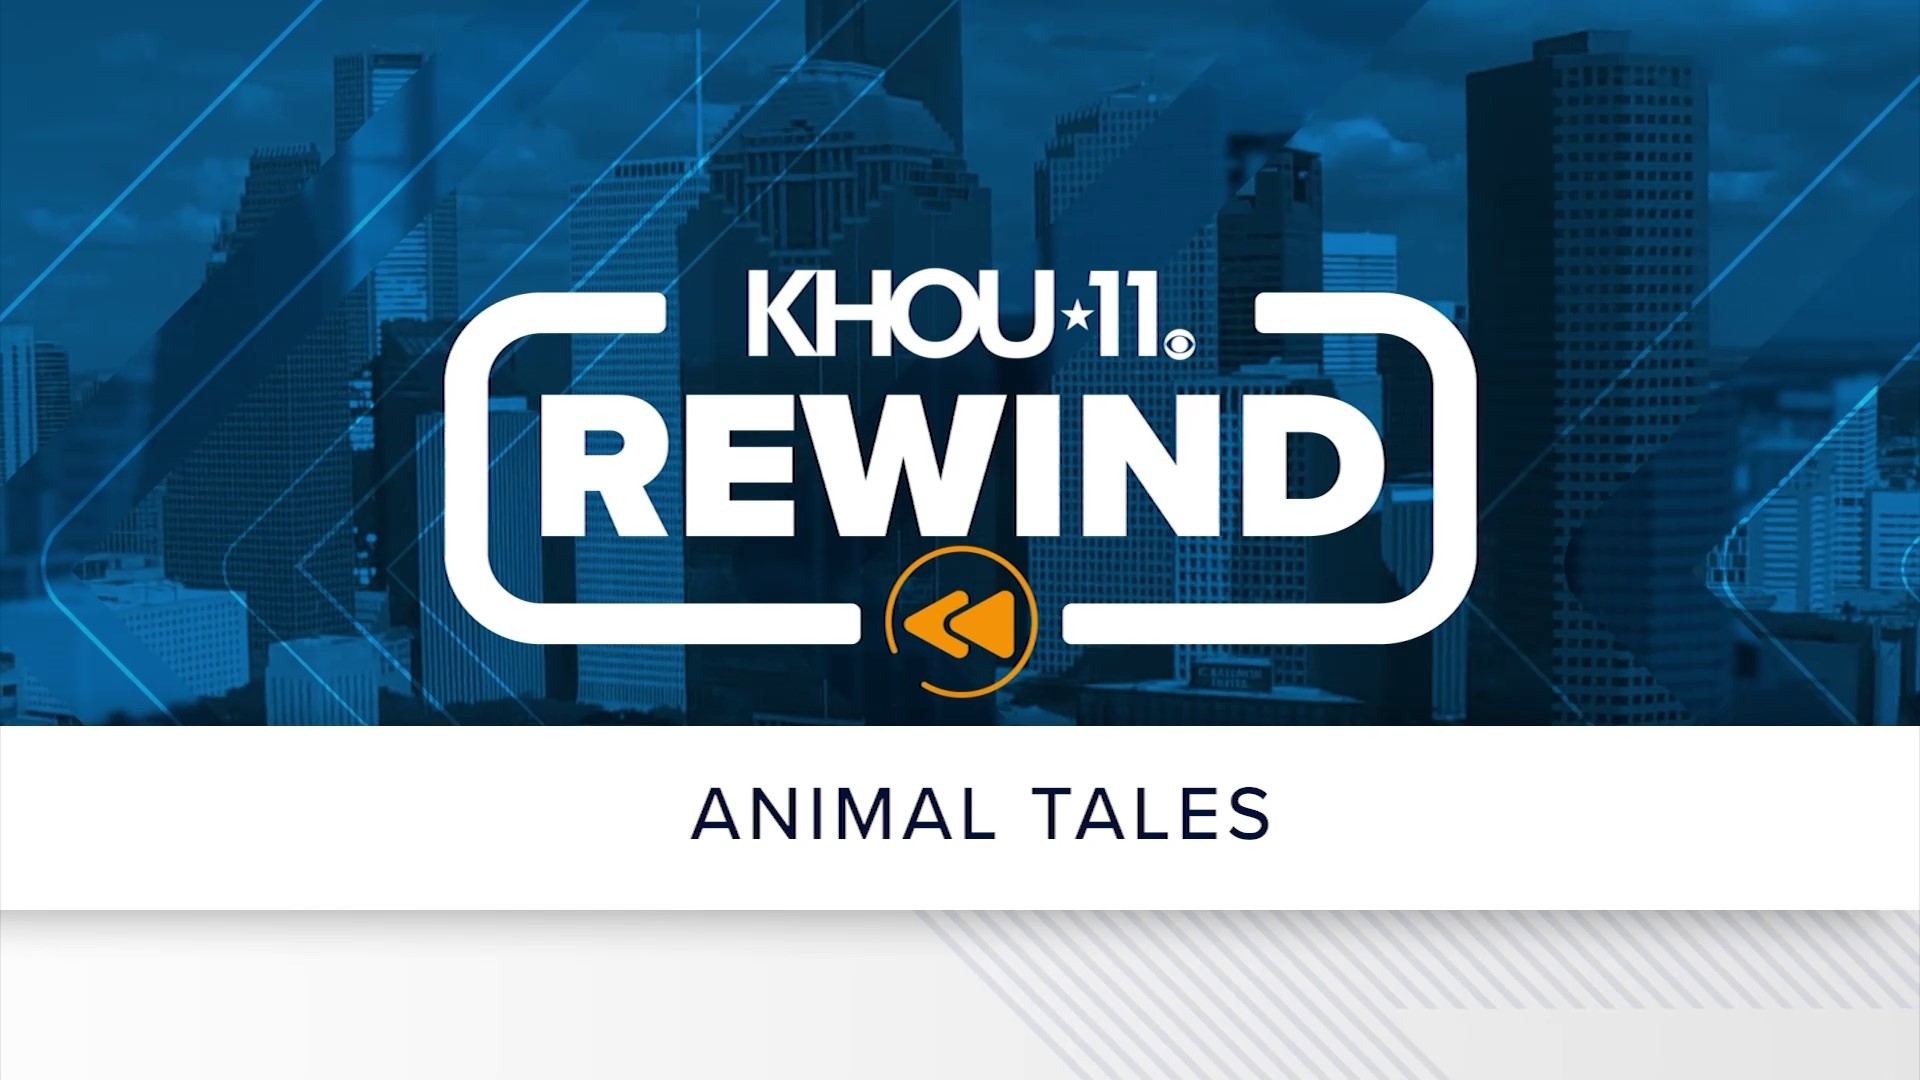 From a life-saving dog to a feline criminal, this special highlights the resilient animals that touch our lives, bring joy and unveil some surprises.